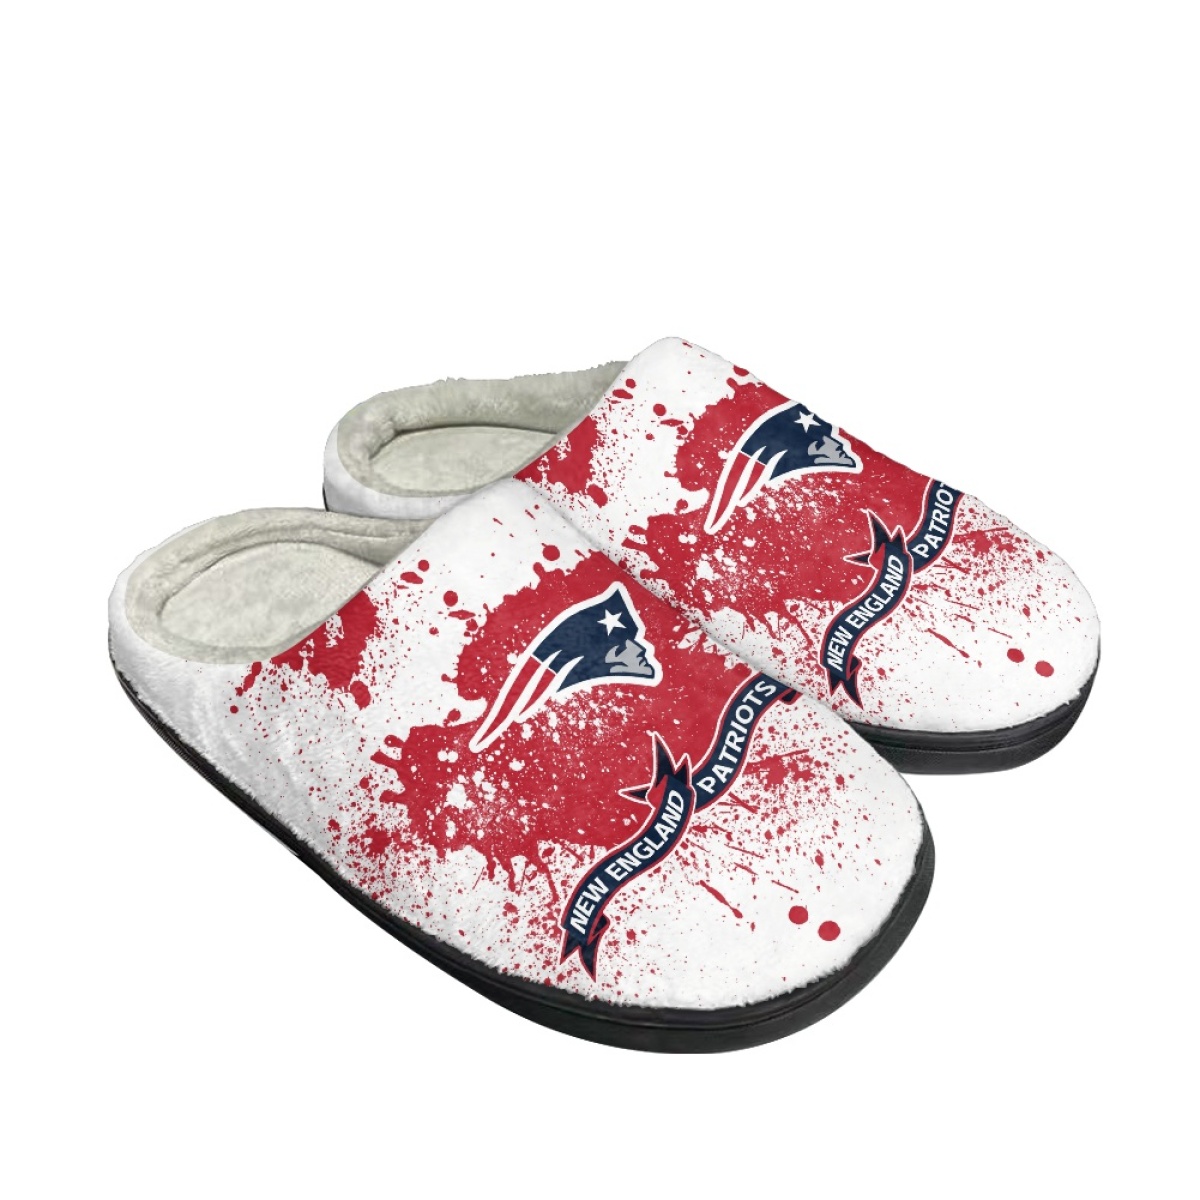 Women's New England Patriots Slippers/Shoes 006